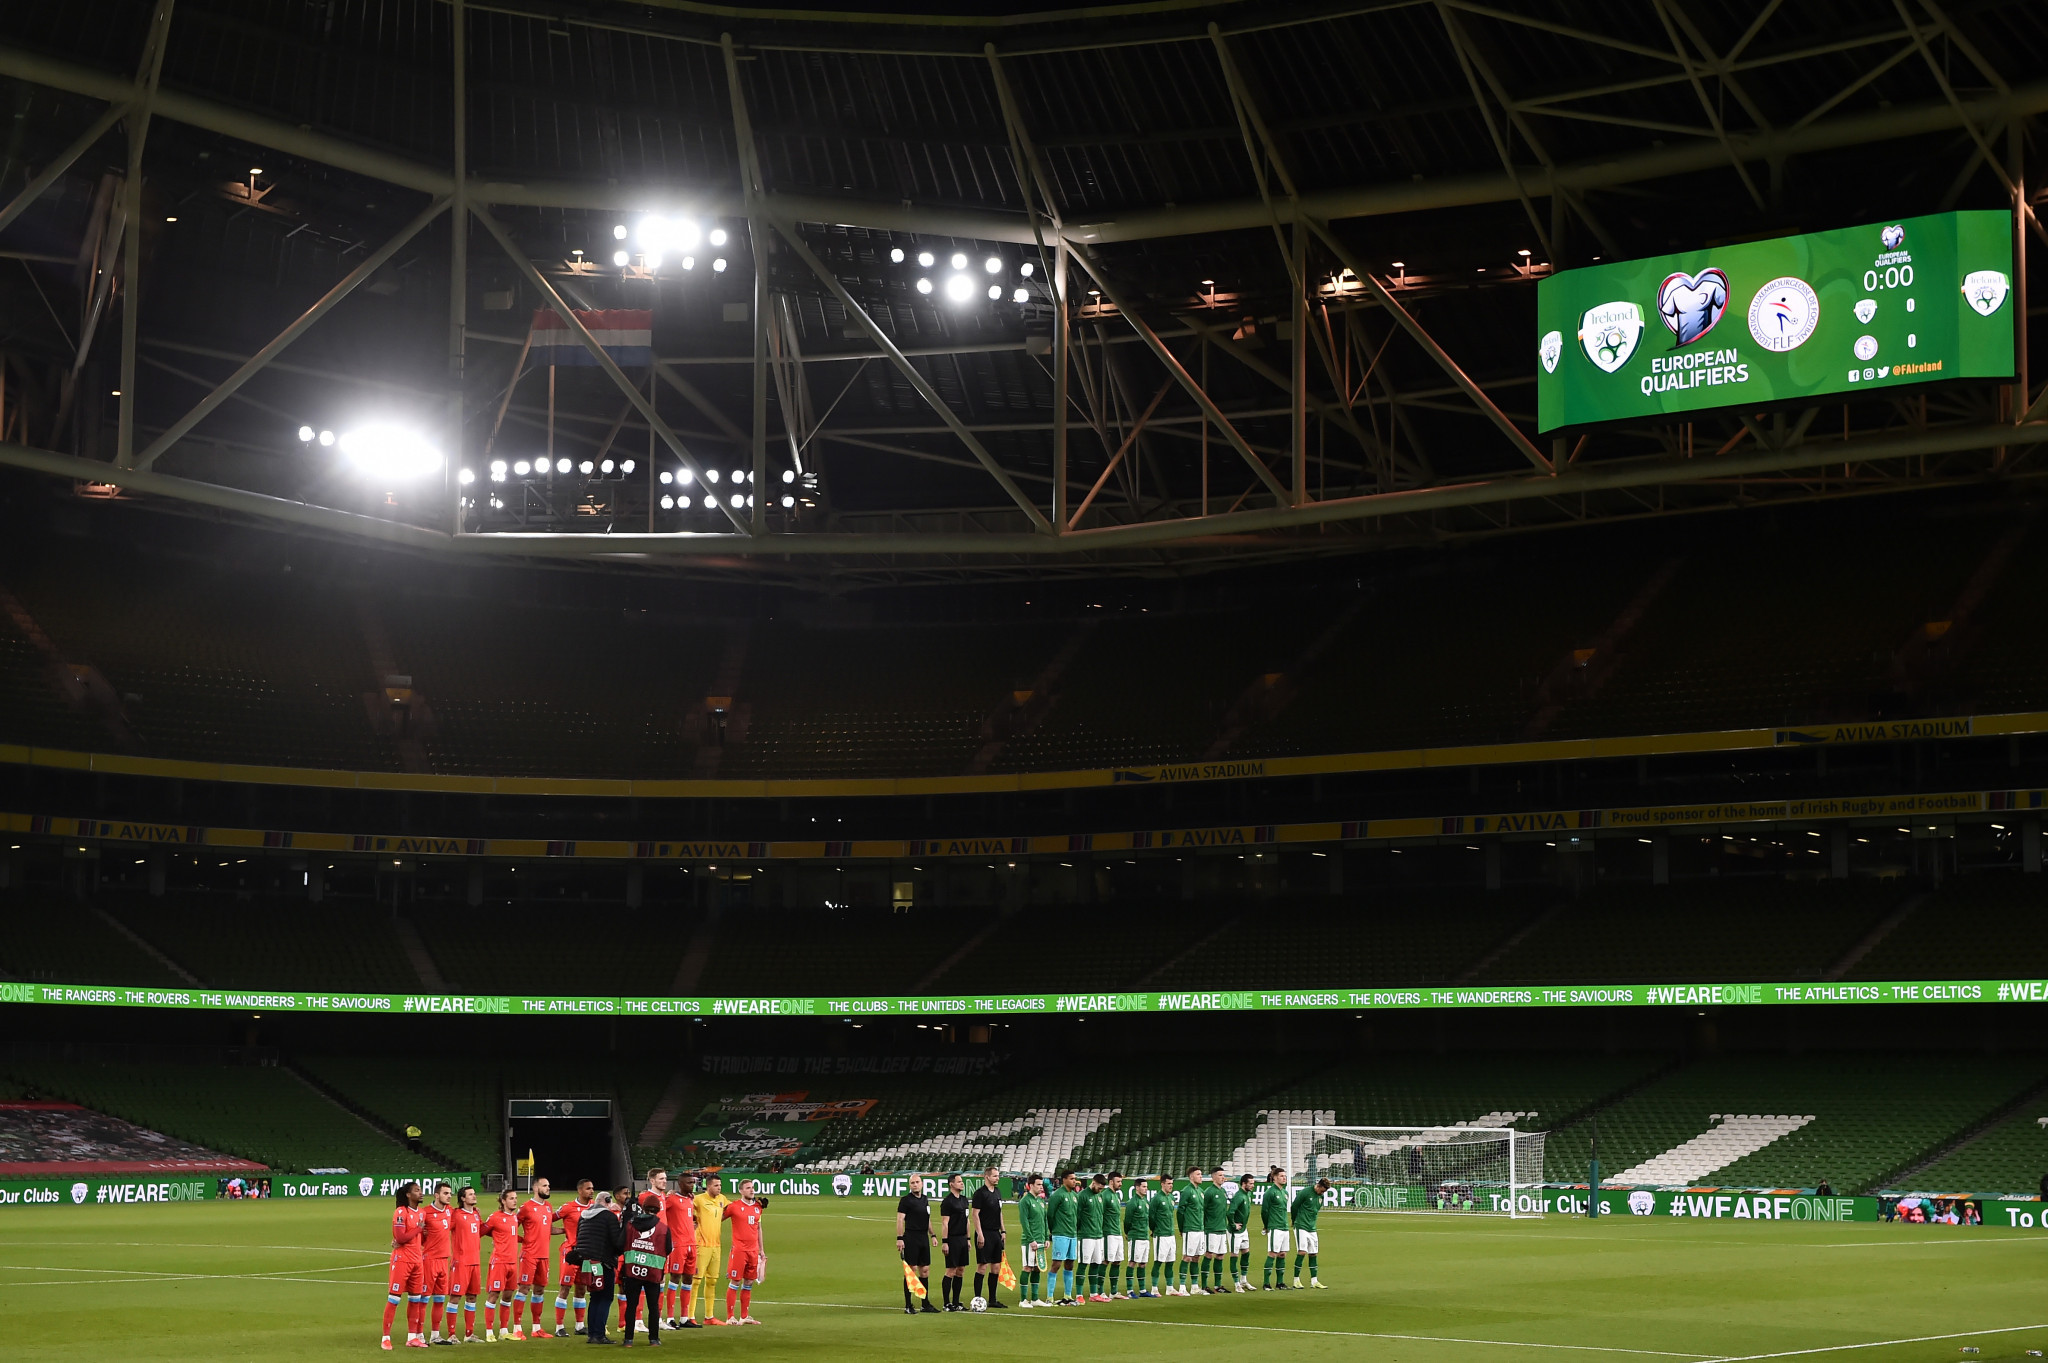 Dublin's Aviva Stadium faces being axed from the list of Euro 2020 host cities ©Getty Images